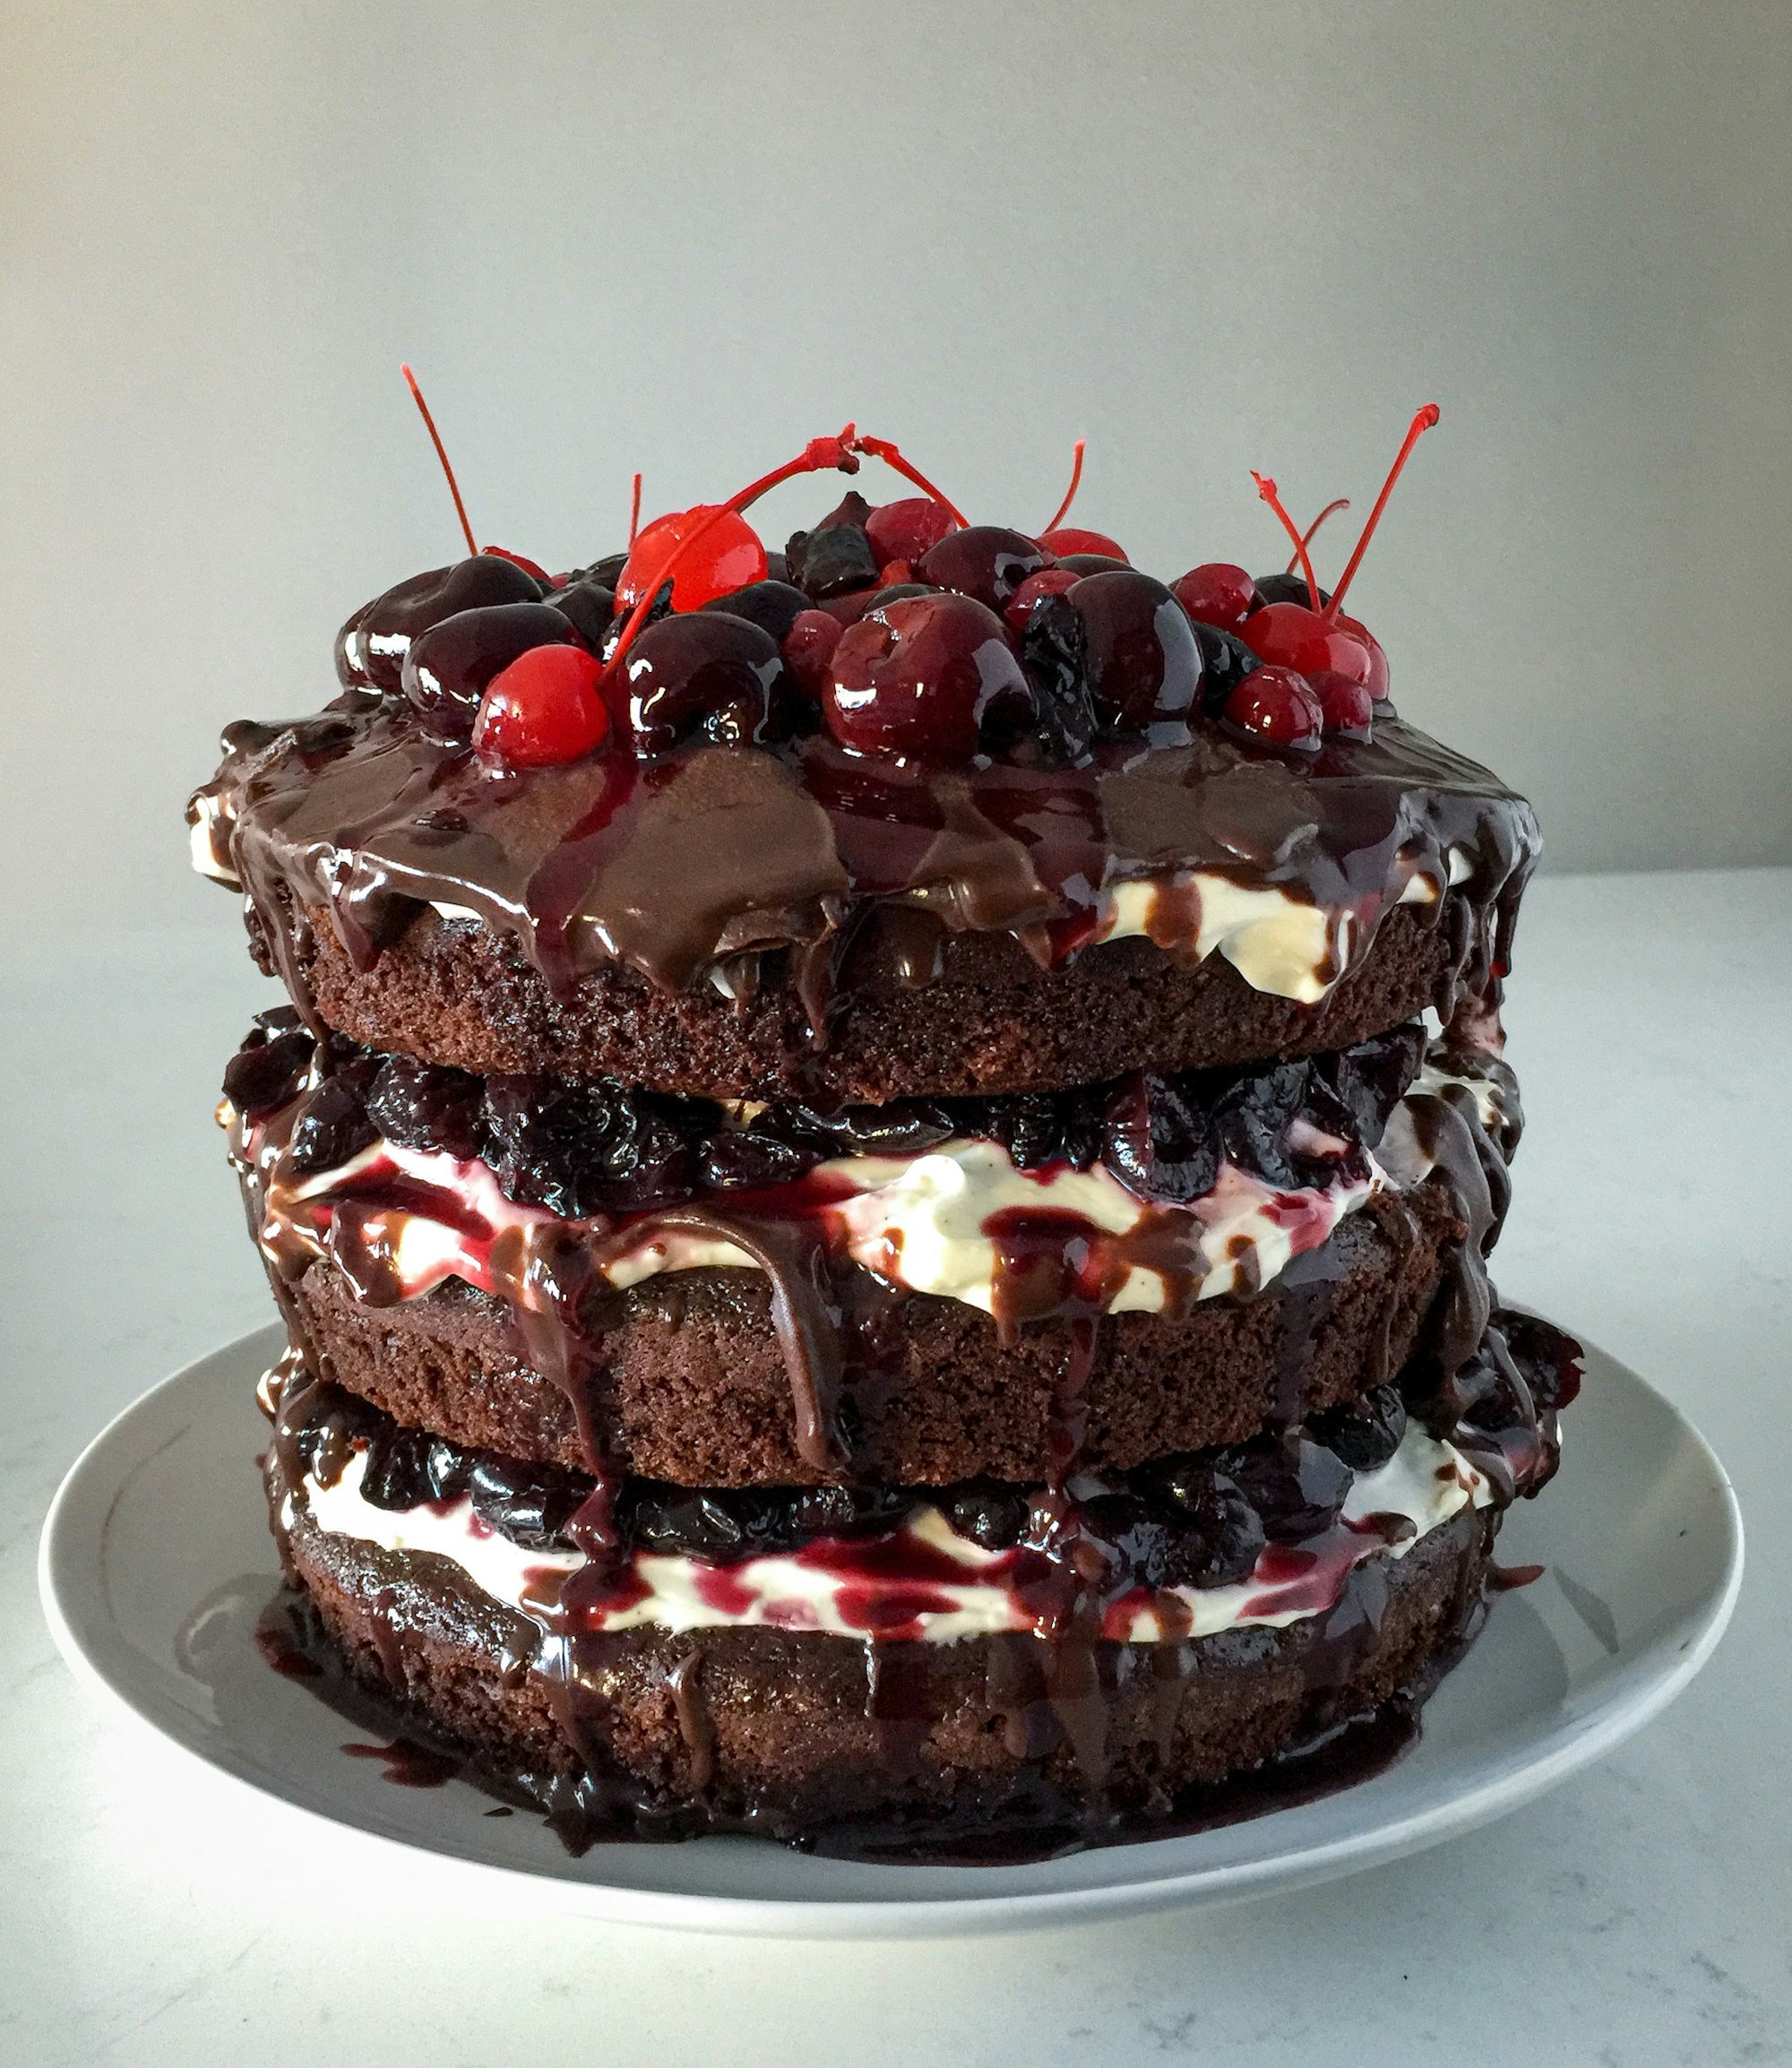 In Germany, the traditional black forest cake is a standard thing, I decided to go outside of the box and make my version of a standard.